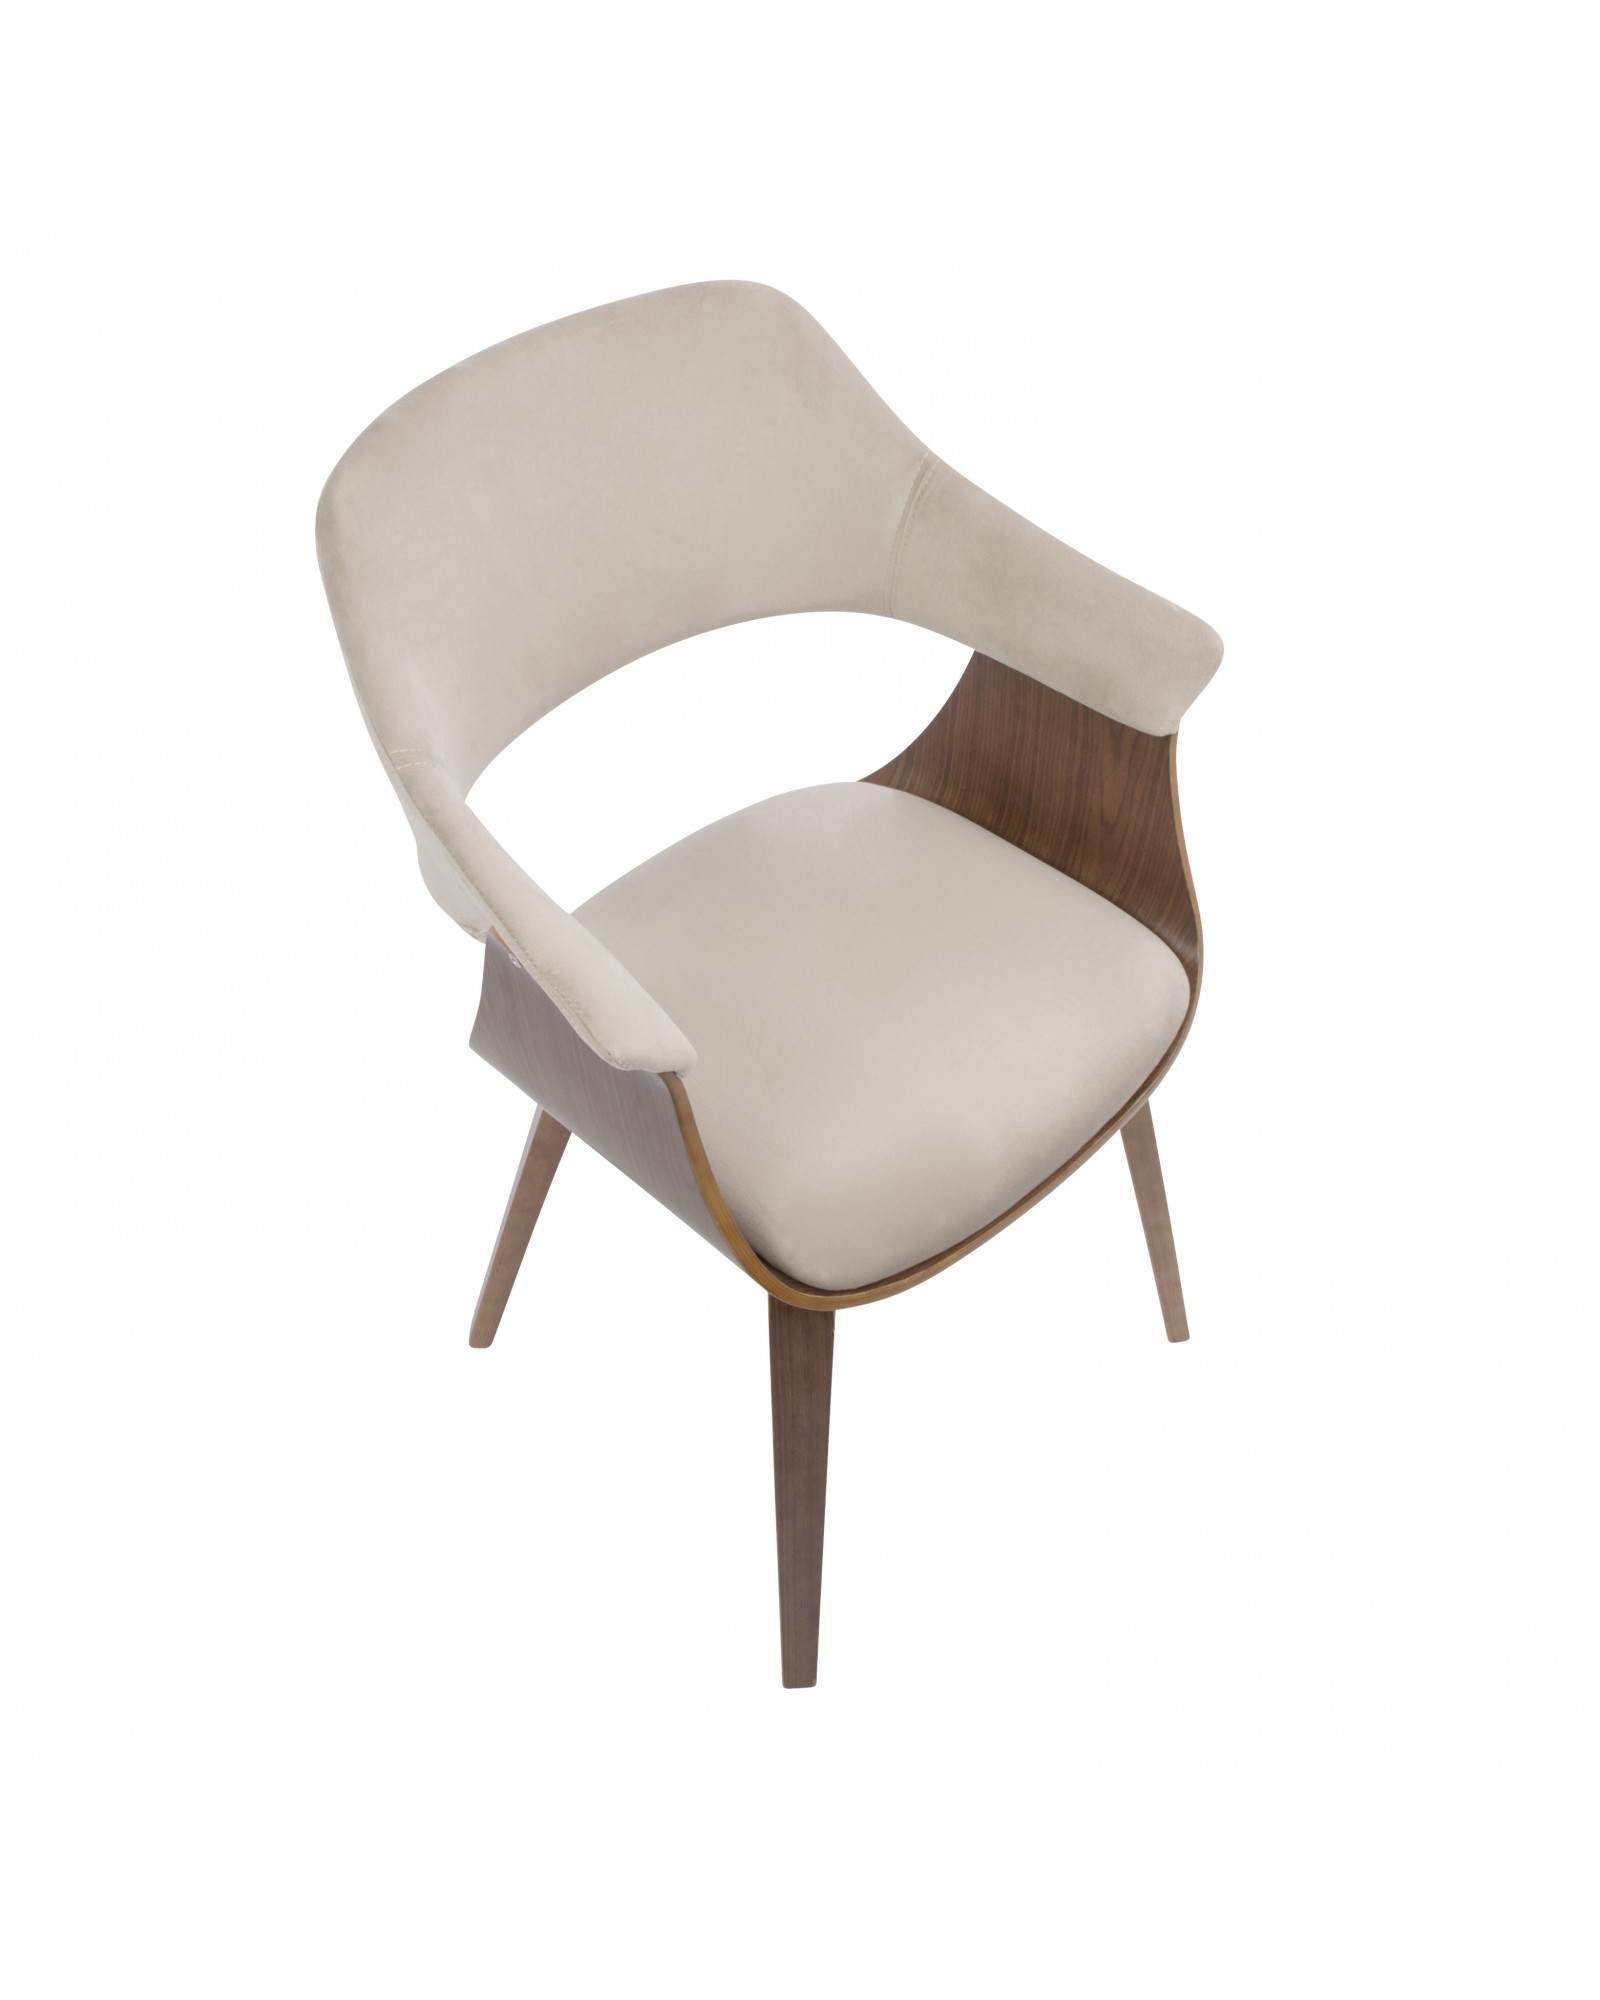 Lucci Mid-Century Modern Chair in Walnut and Tan Velvet